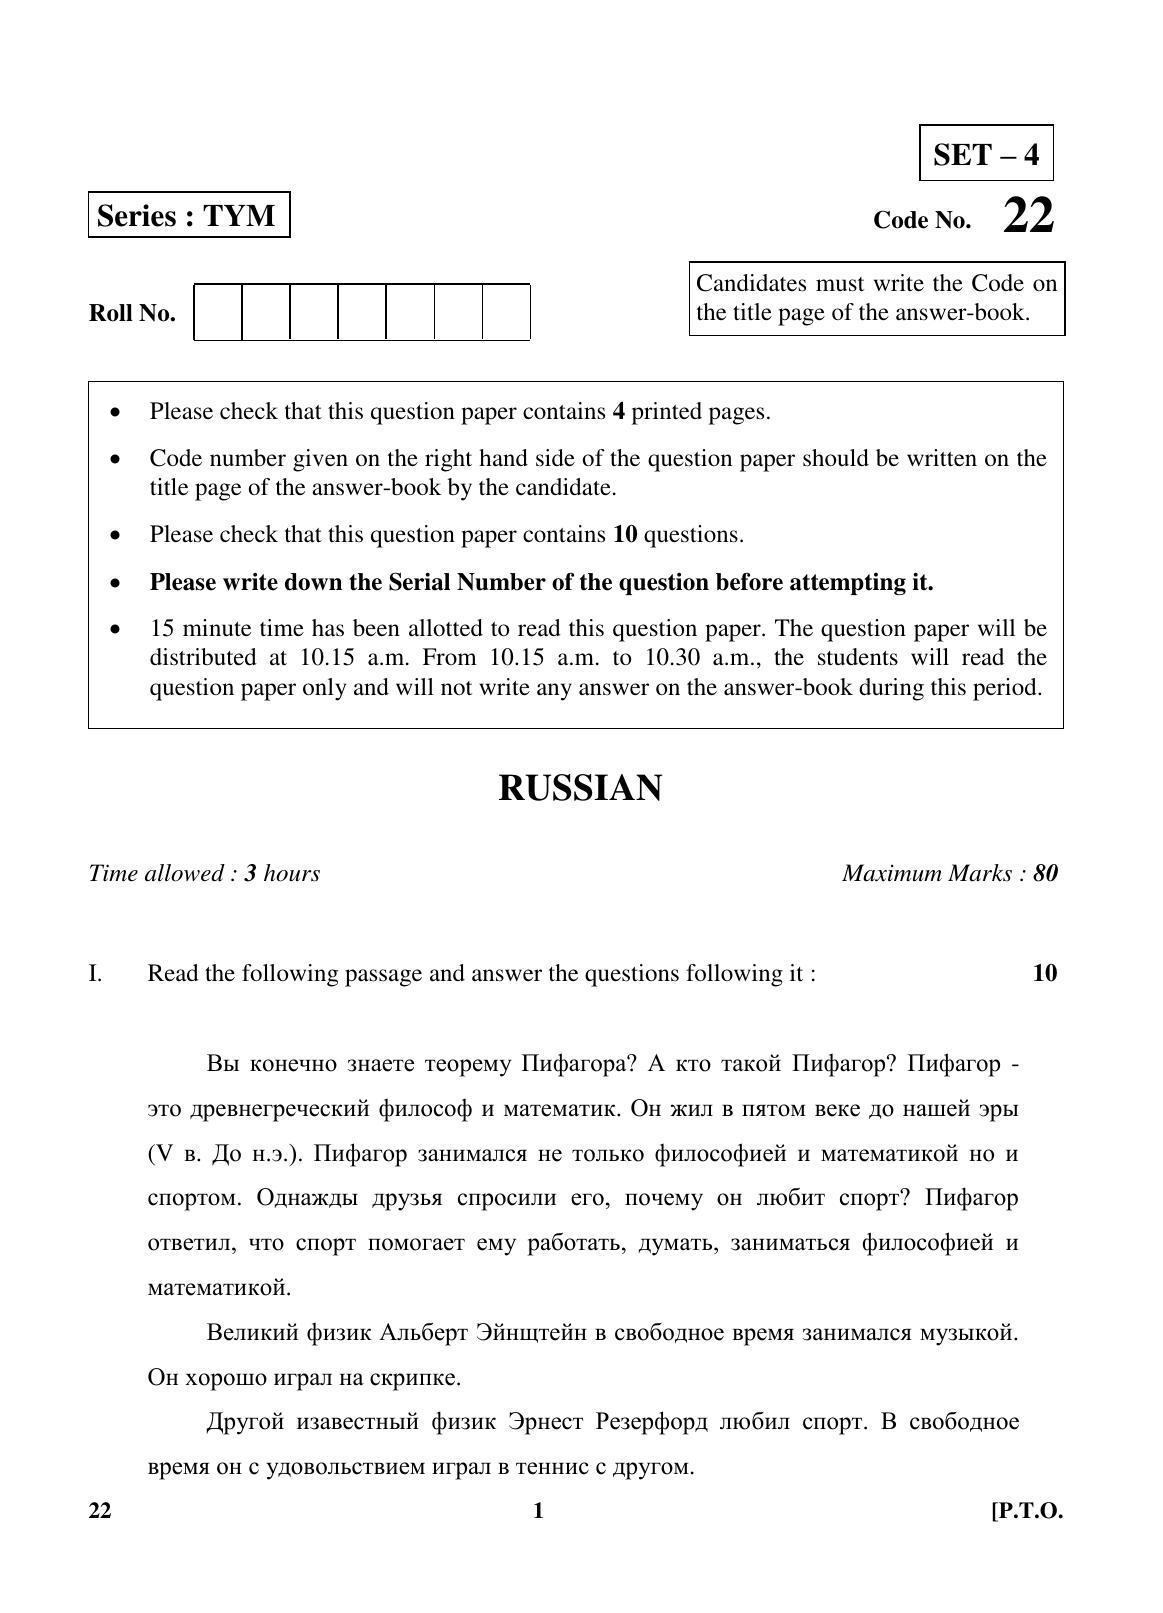 CBSE Class 10 22 (Russian) 2018 Question Paper - Page 1